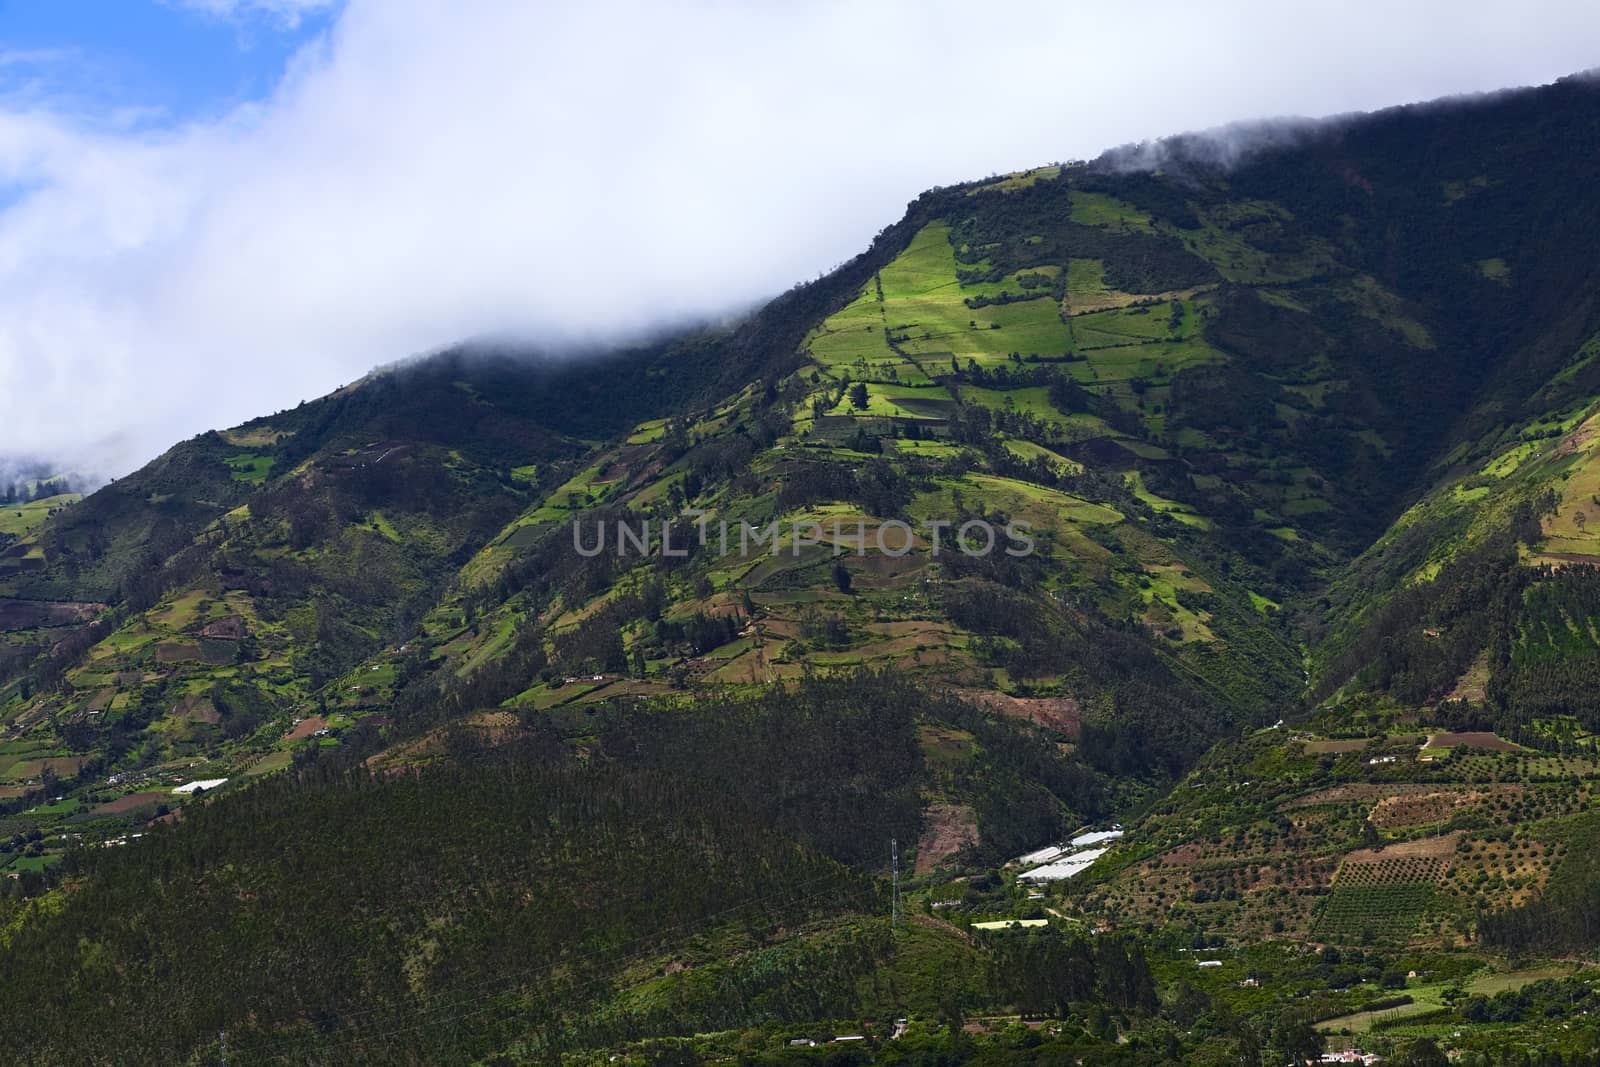 Rural hillside landscape with forests, small farms and orchards along the road between Ambato and Banos in Tungurahua Province in Central Ecuador. Even though the area lies relatively high (around 1800-2000 meters), many fruits and vegetables are being grown here.